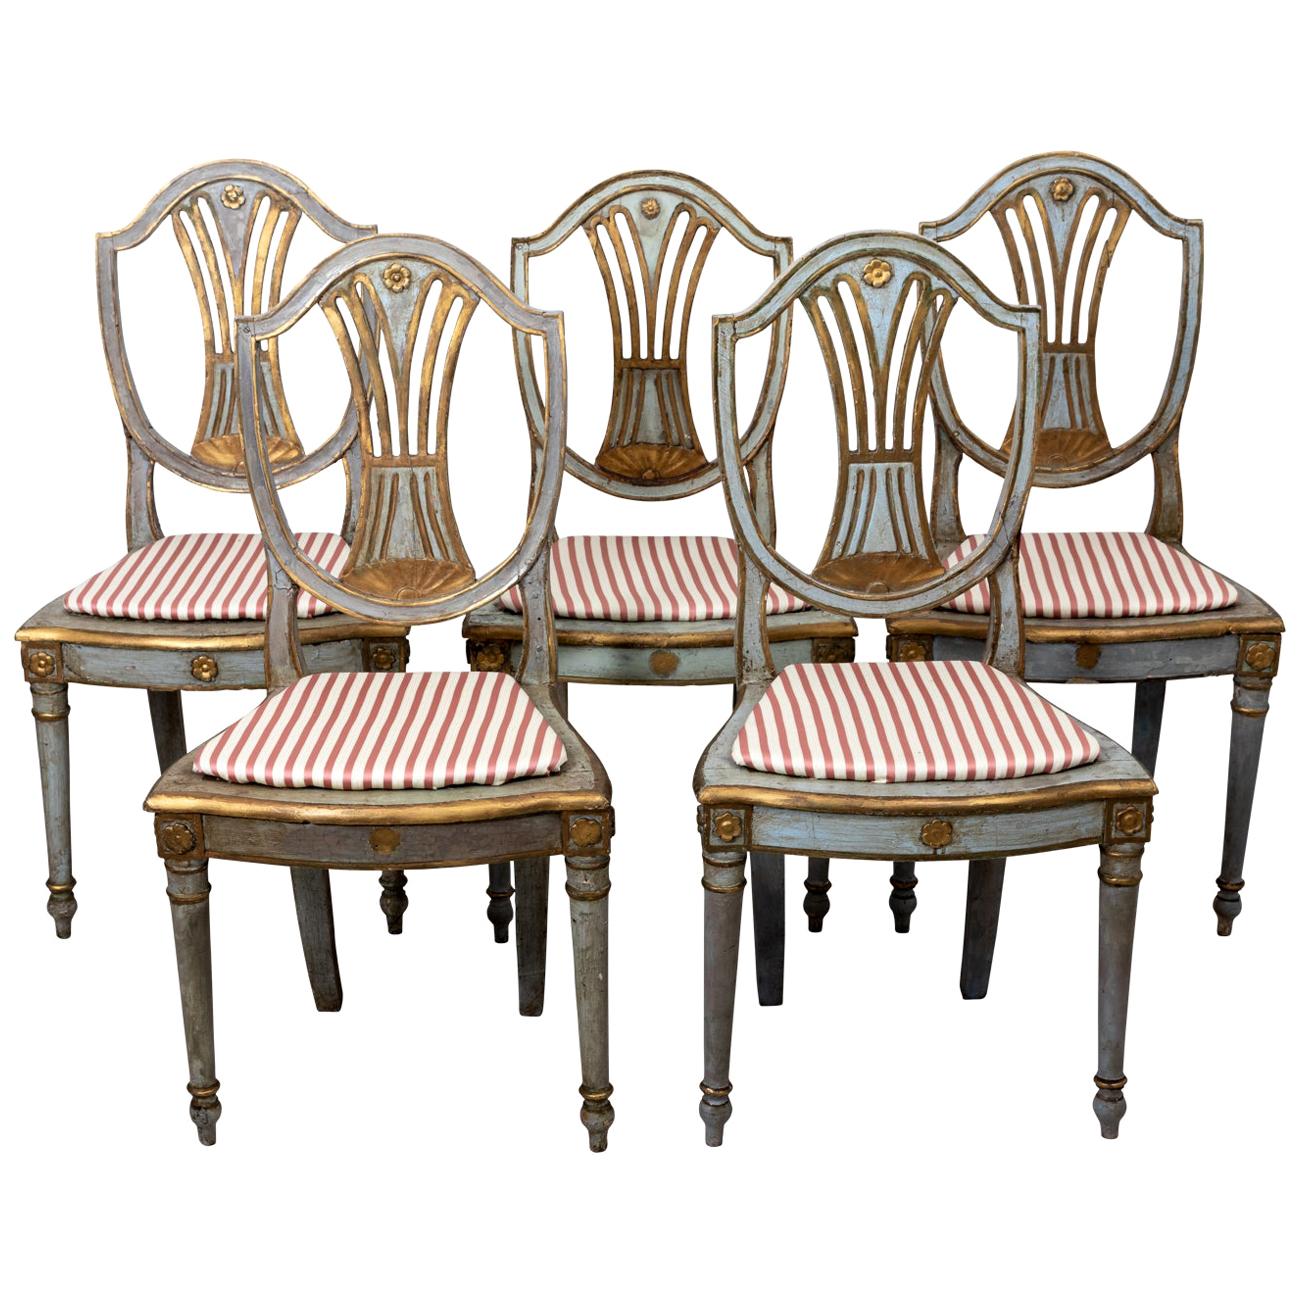 Set of Five Blue and Gold Painted Shield Back Side Chairs